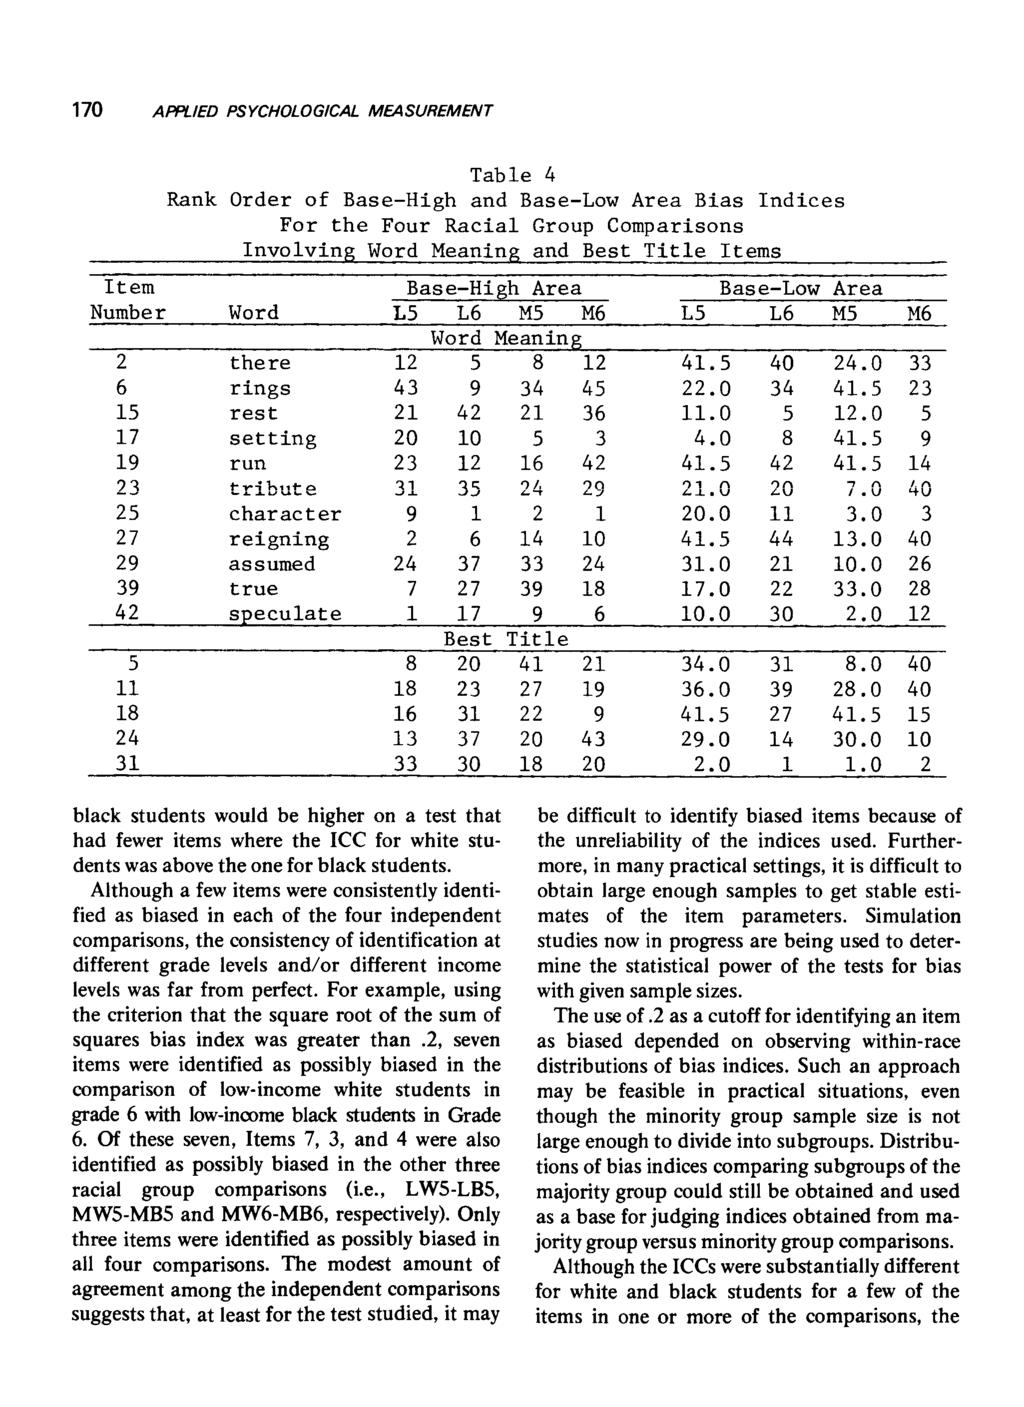 _ 170 Table 4 Rank Order of Base-High and Base-Low Area Bias Indices For the Four Racial Group Comparisons Involving Word Meaning and Best Title Items black students would be higher on a test that